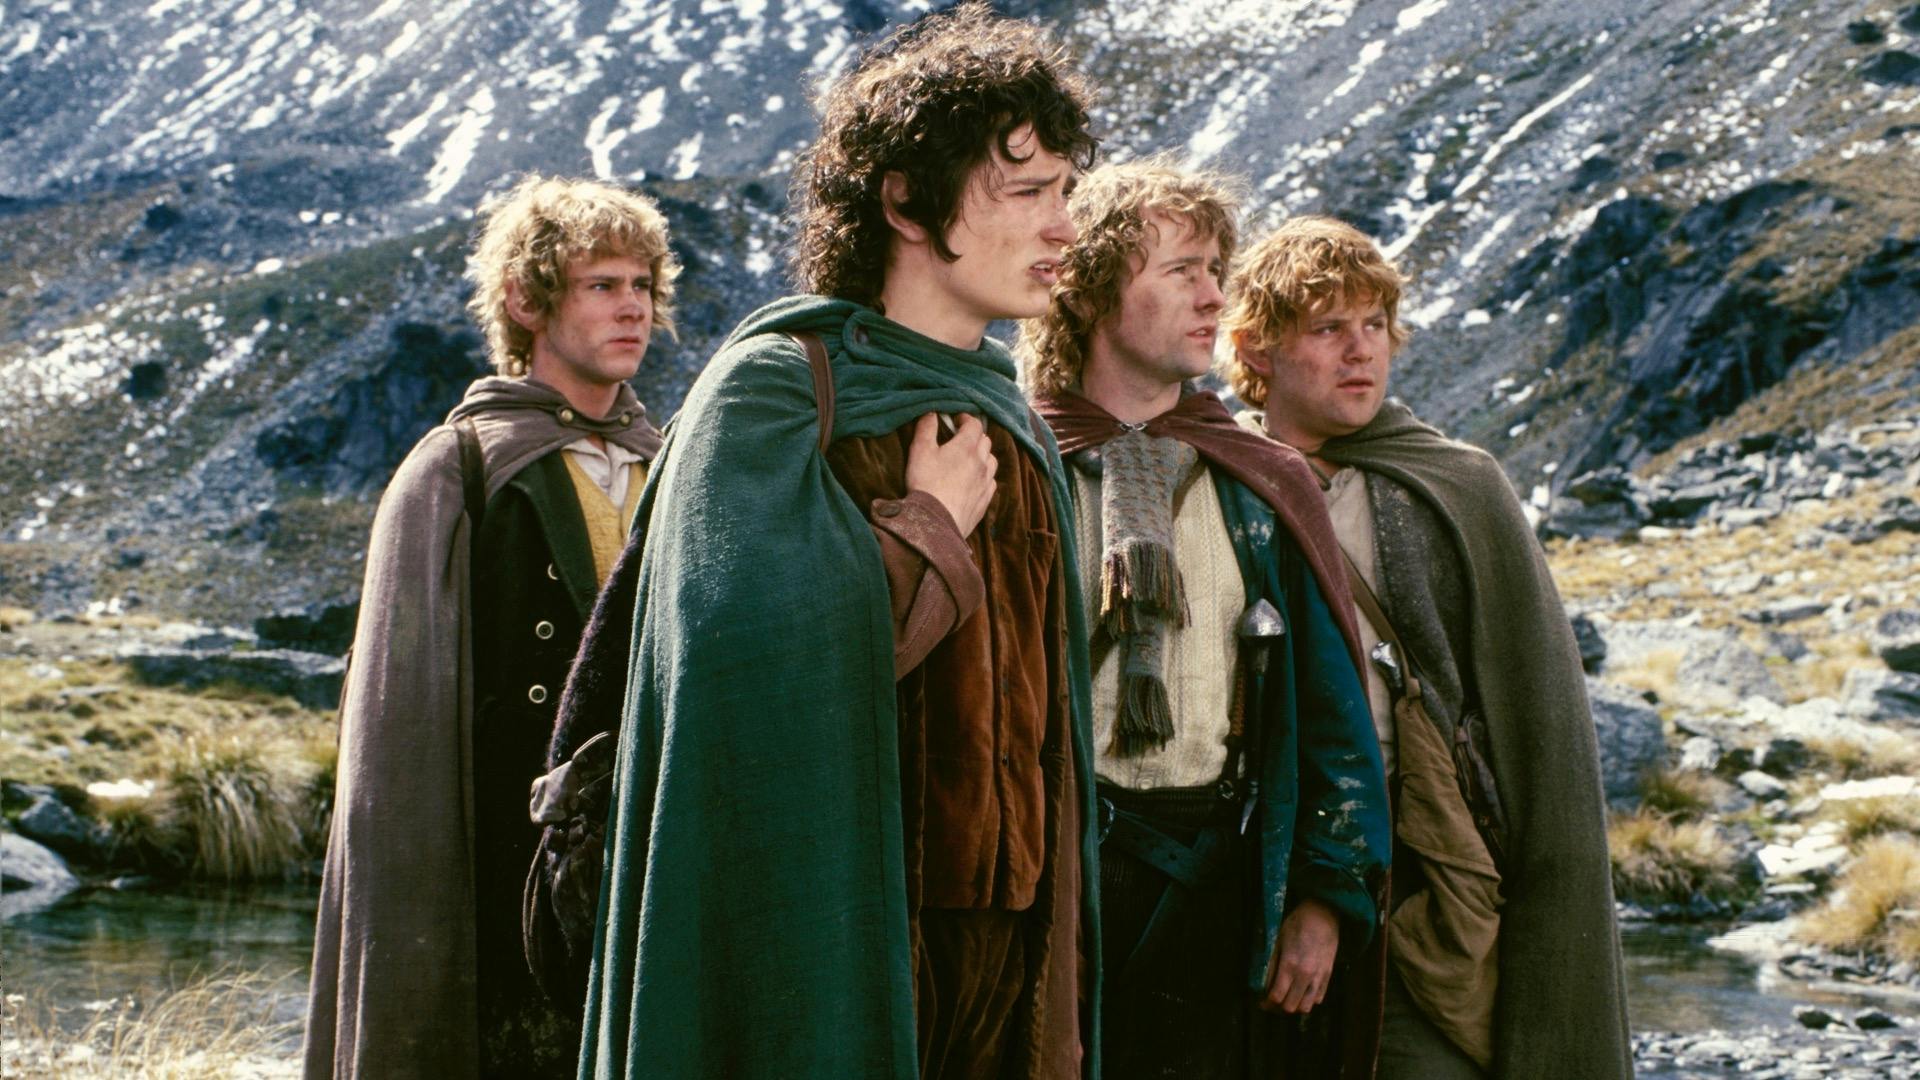 Lord of the Rings stars Dominic Monaghan and Billy Boyd reveal films  'almost' featured nude hobbit scene